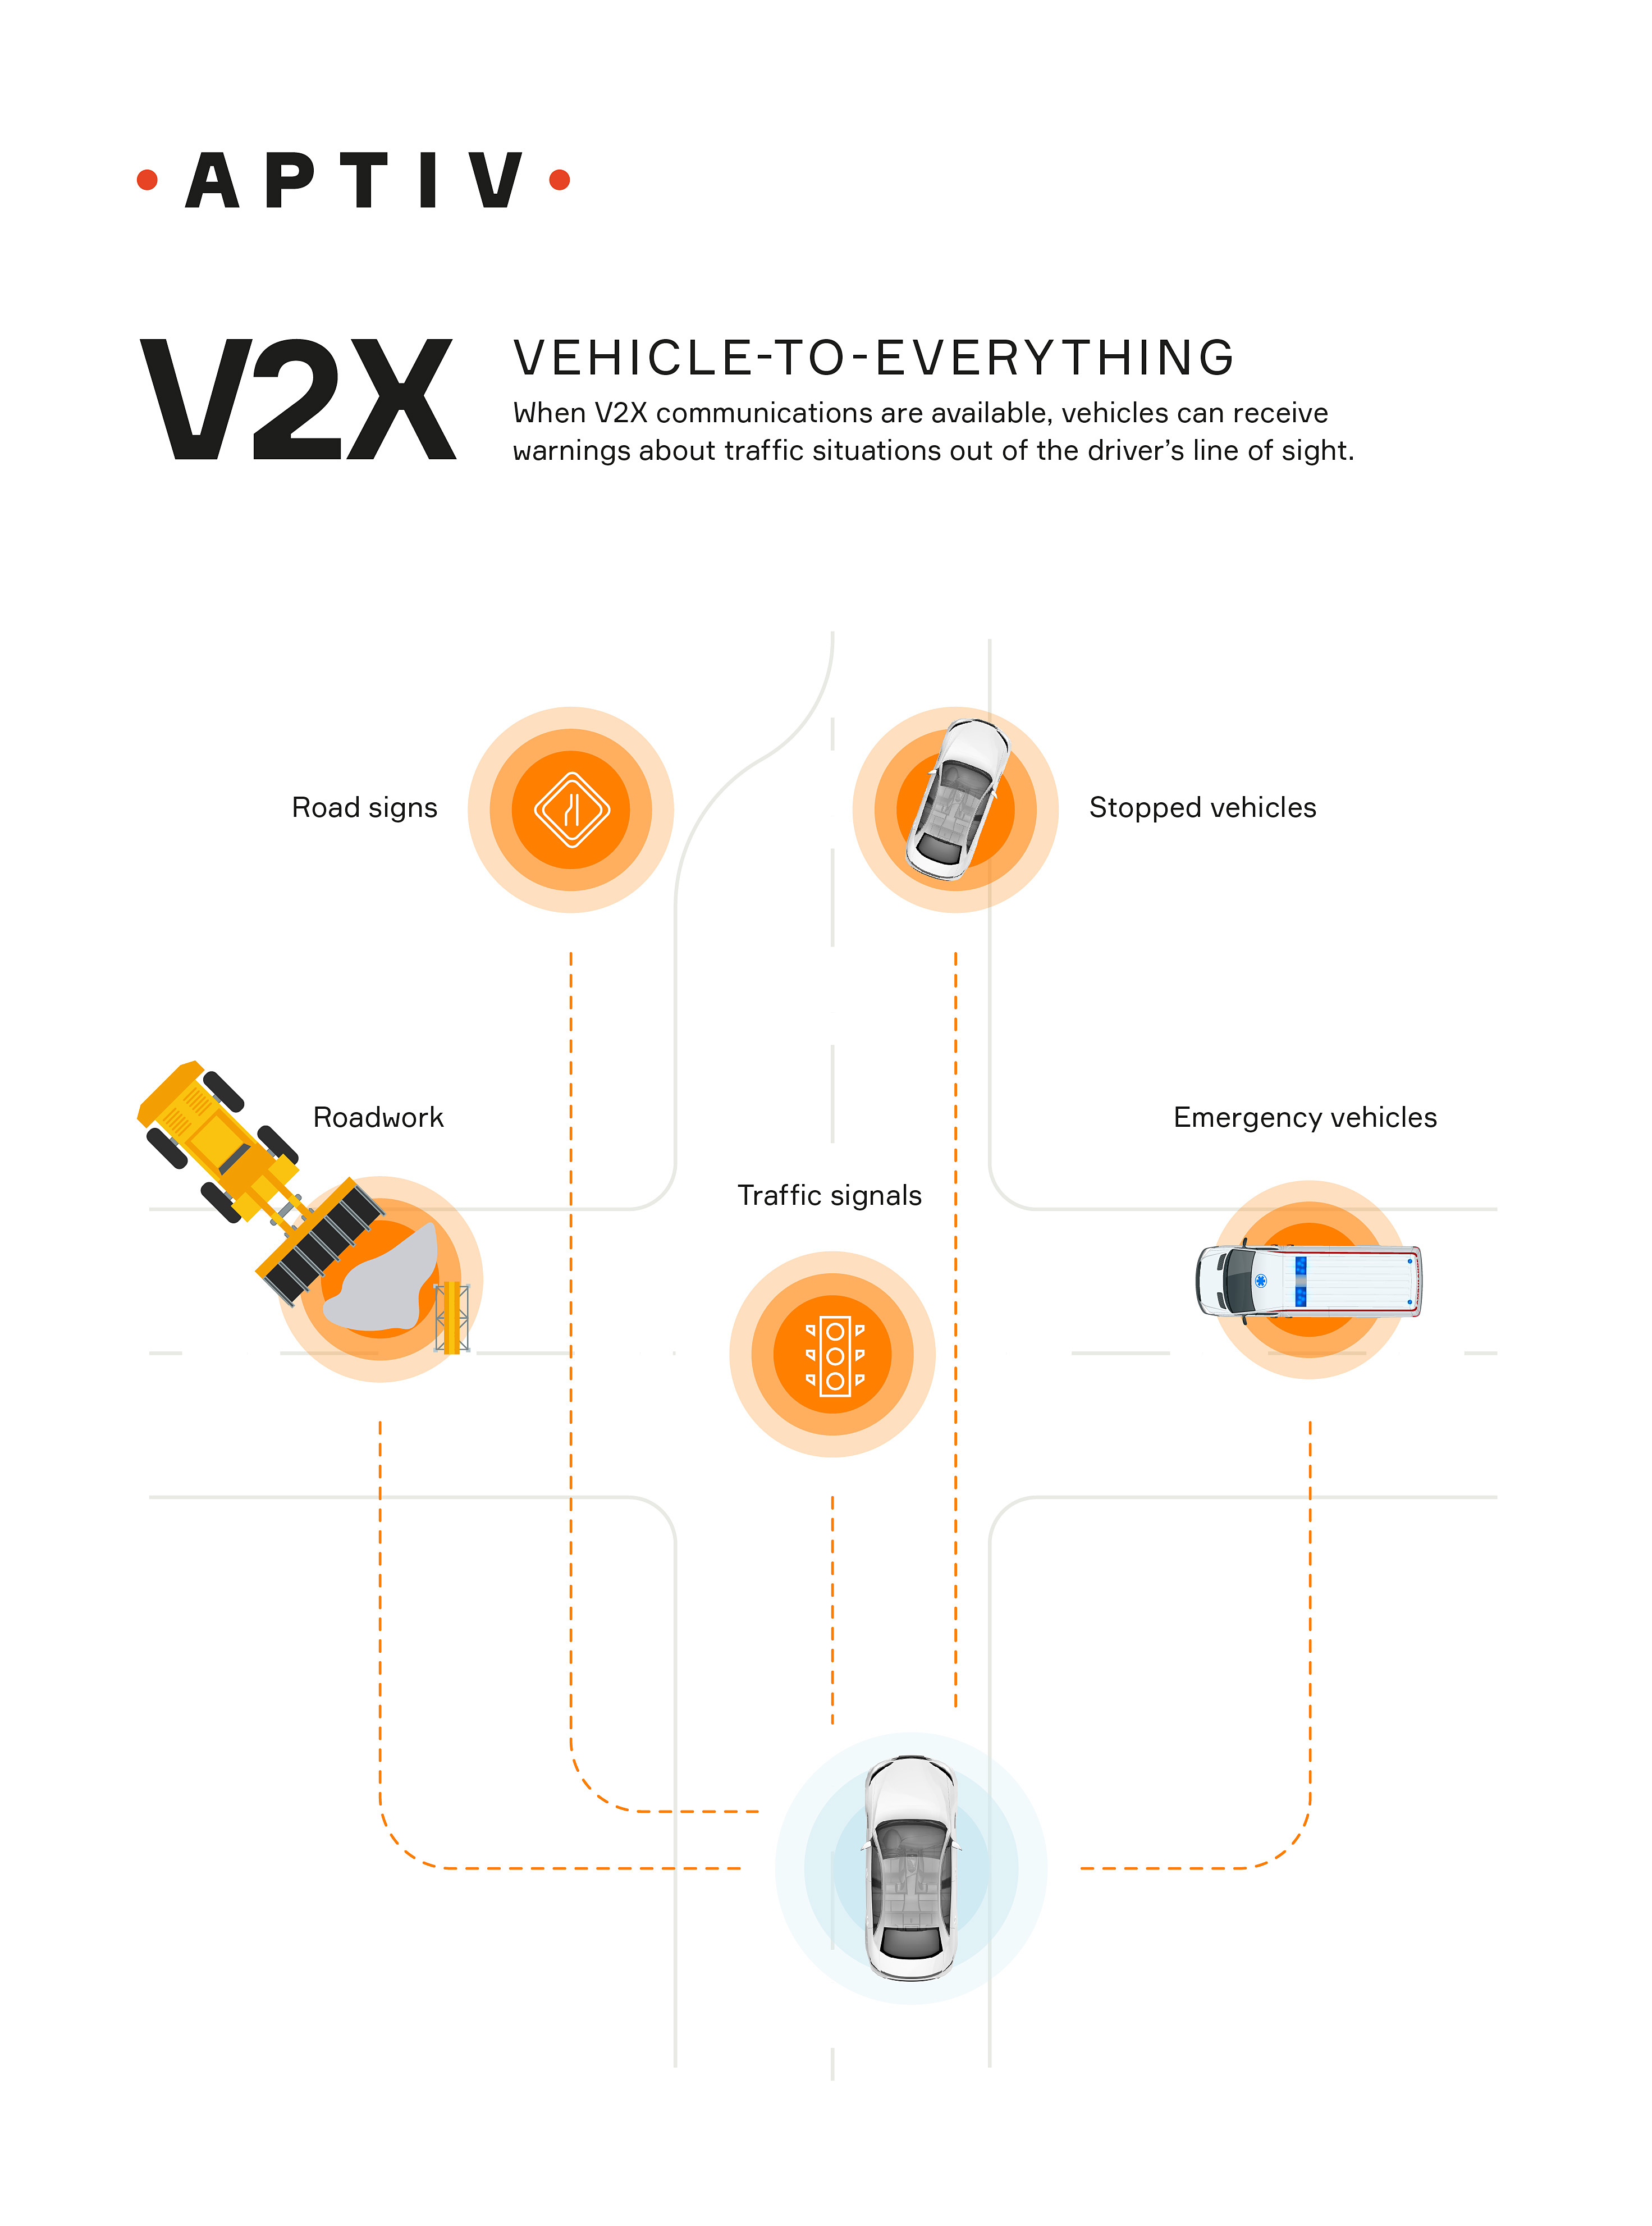 What is V2X